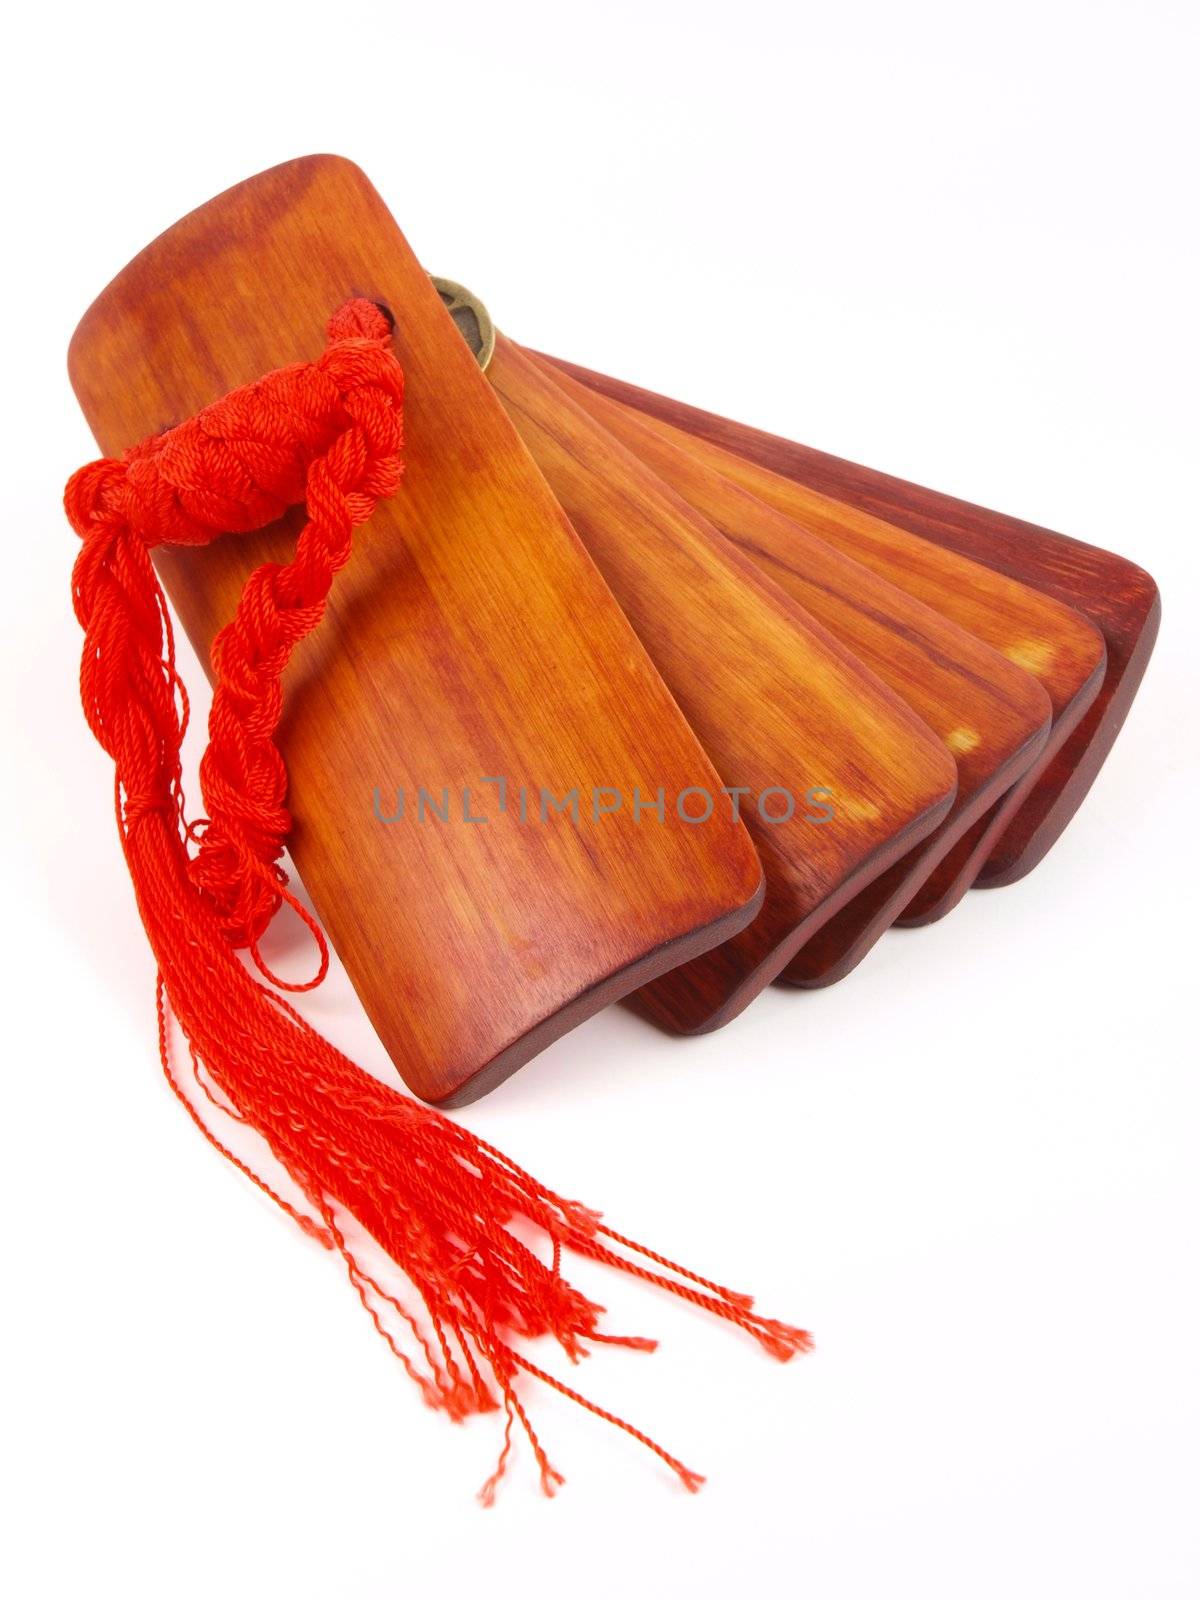 Traditional Chinese music instrument. Close up on white background by dotweb